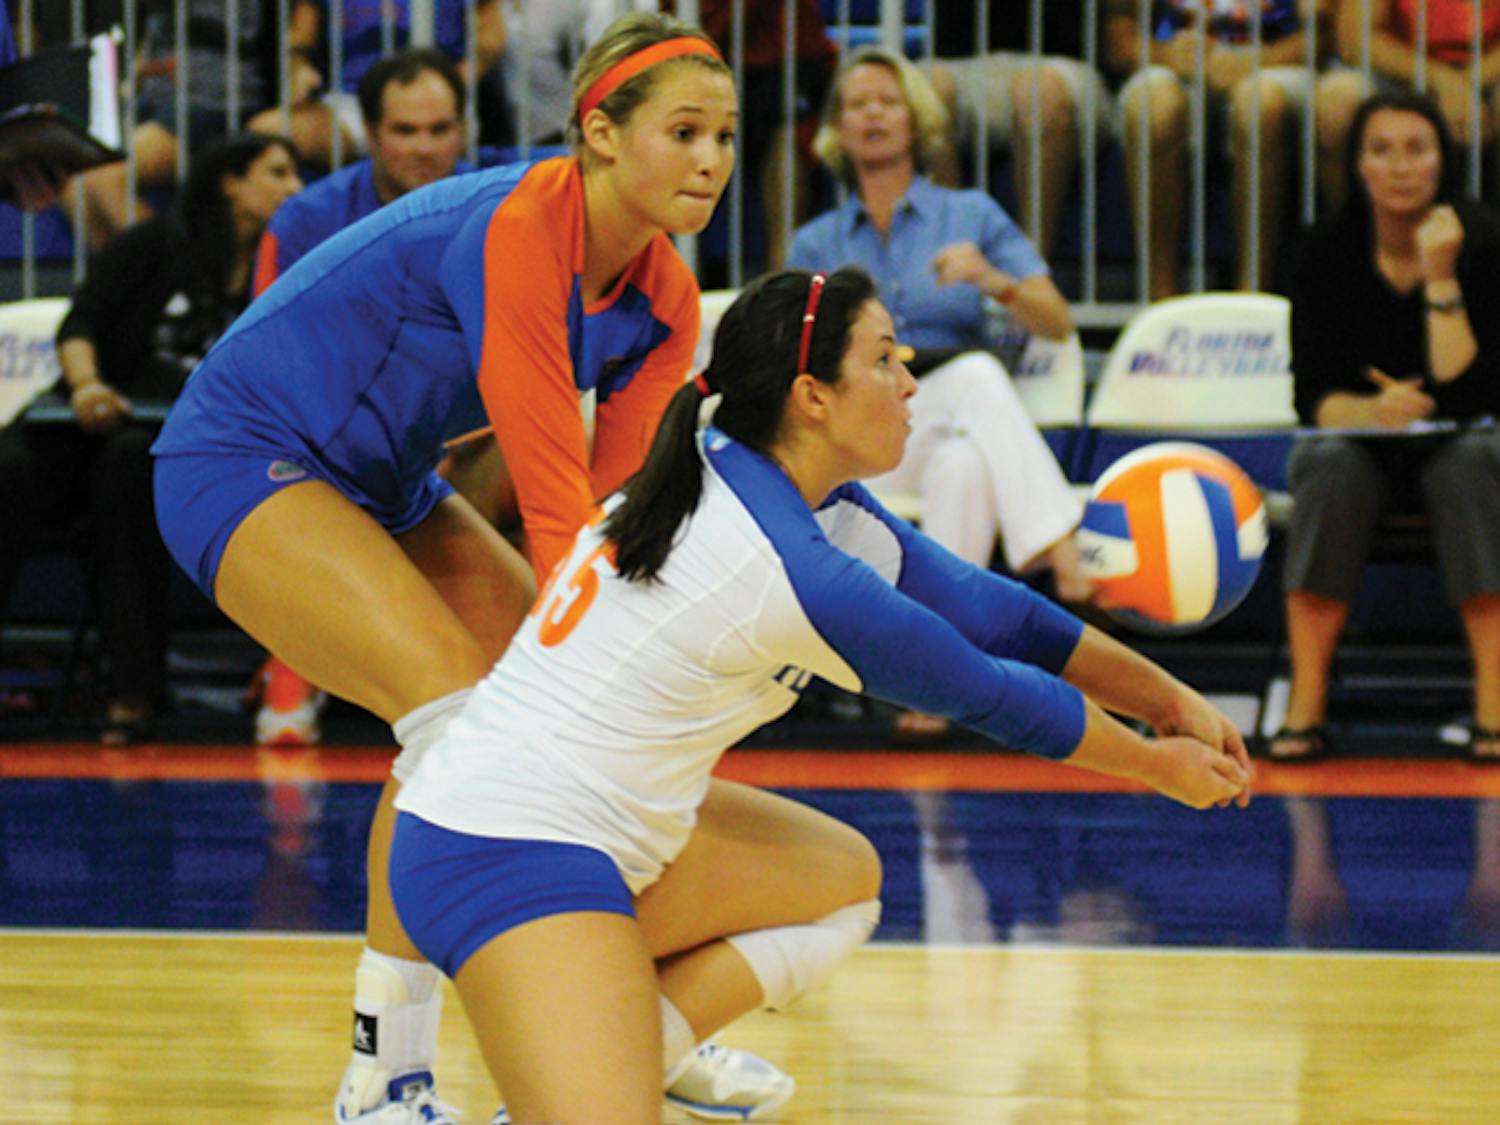 Florida redshirt freshman Taylor Unroe (right) averages 3.55 digs per set, and as a team the Gators are last in the Southeastern Conference in total digs.